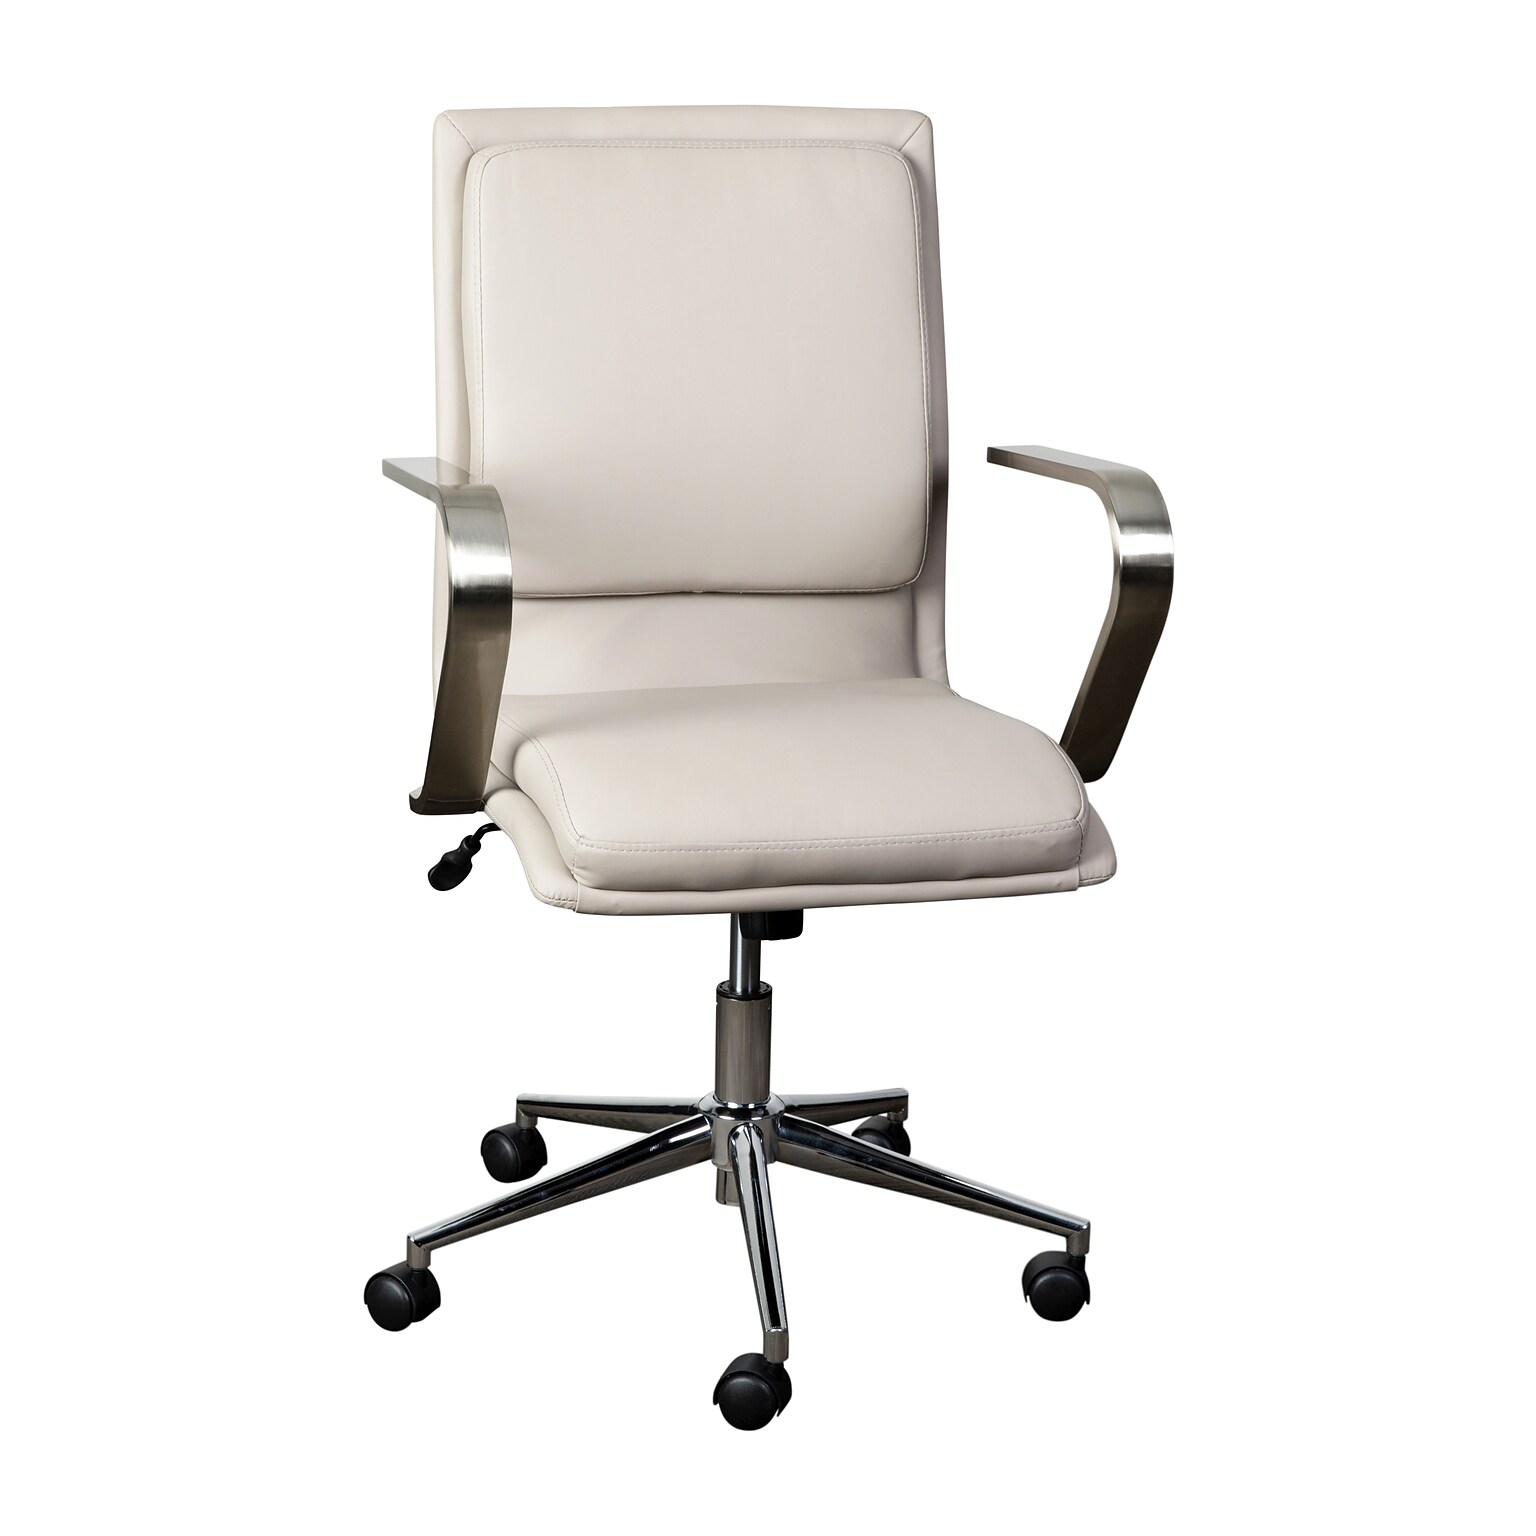 Flash Furniture James LeatherSoft Swivel Mid-Back Executive Office Chair, Taupe/Chrome (GO21111BTAUPCHR)